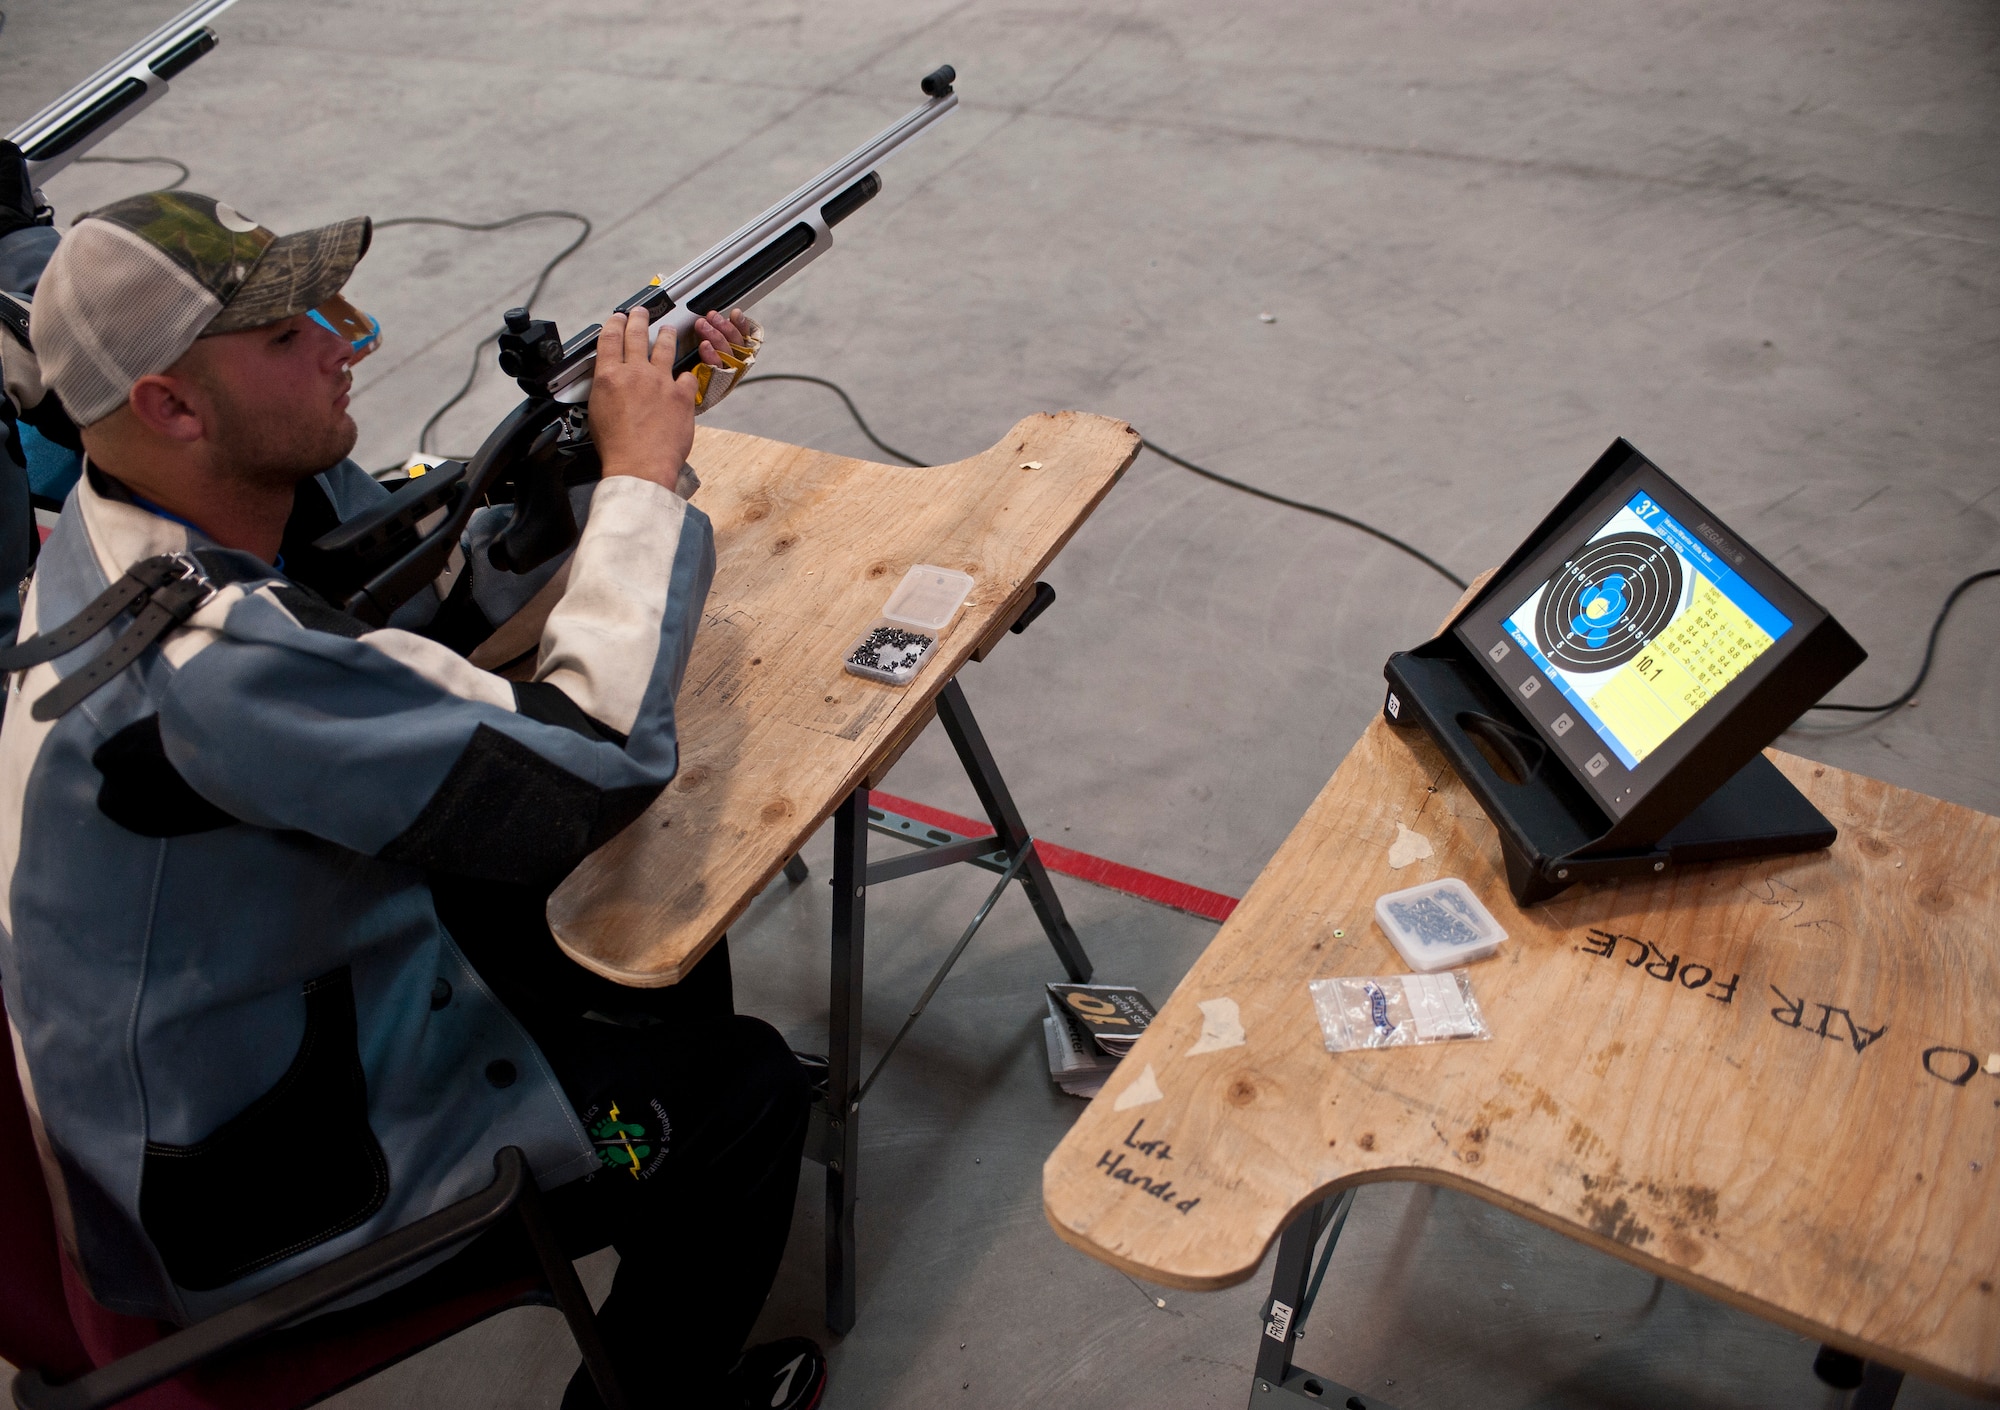 Edward Newbern, 2015 U.S. Air Force Trials participant, reloads his rifle during the rifle shooting preliminary competition at Nellis Air Force Base, Nev., March 3, 2015. During the trials, participants will be competing for a spot on the 2015 U.S. Air Force Wounded Warrior Team, which will represent the Air Force at adaptive sports events throughout the year.  (U.S. Air Force photo by Staff Sgt. Siuta B. Ika)